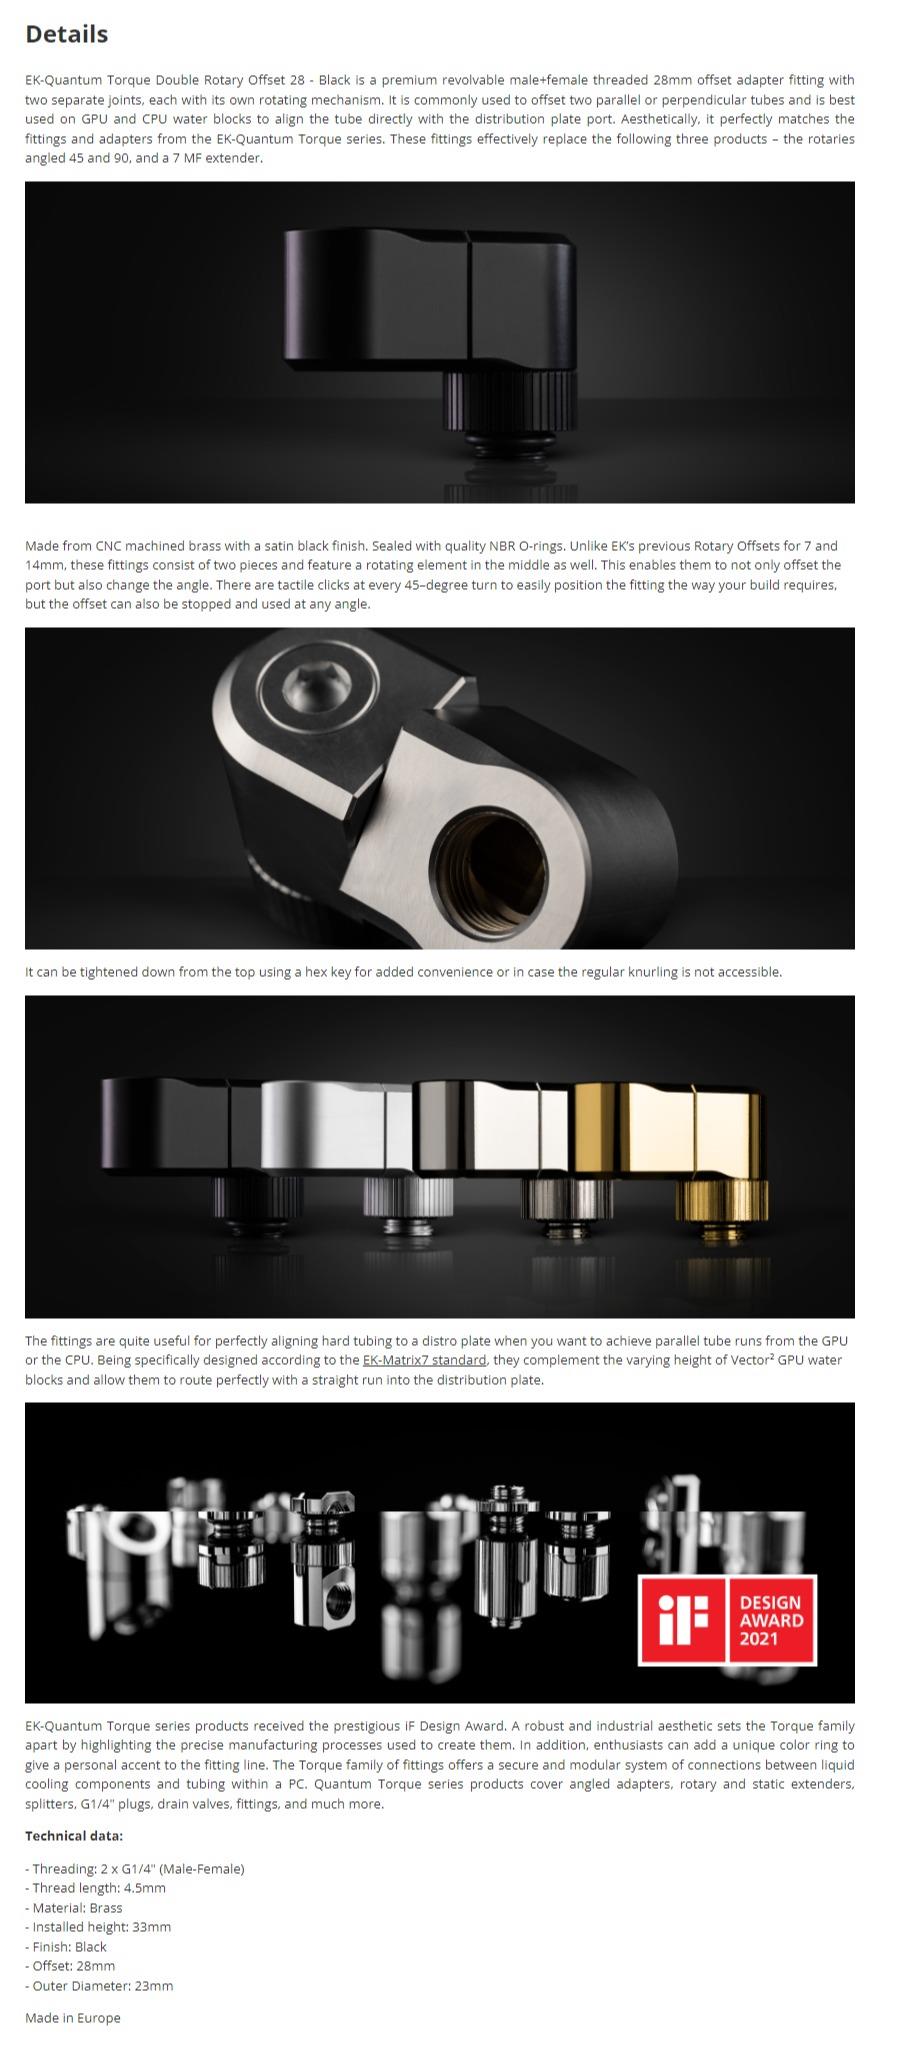 A large marketing image providing additional information about the product EK Quantum Torque Double Rotary Offset 28 - Black - Additional alt info not provided